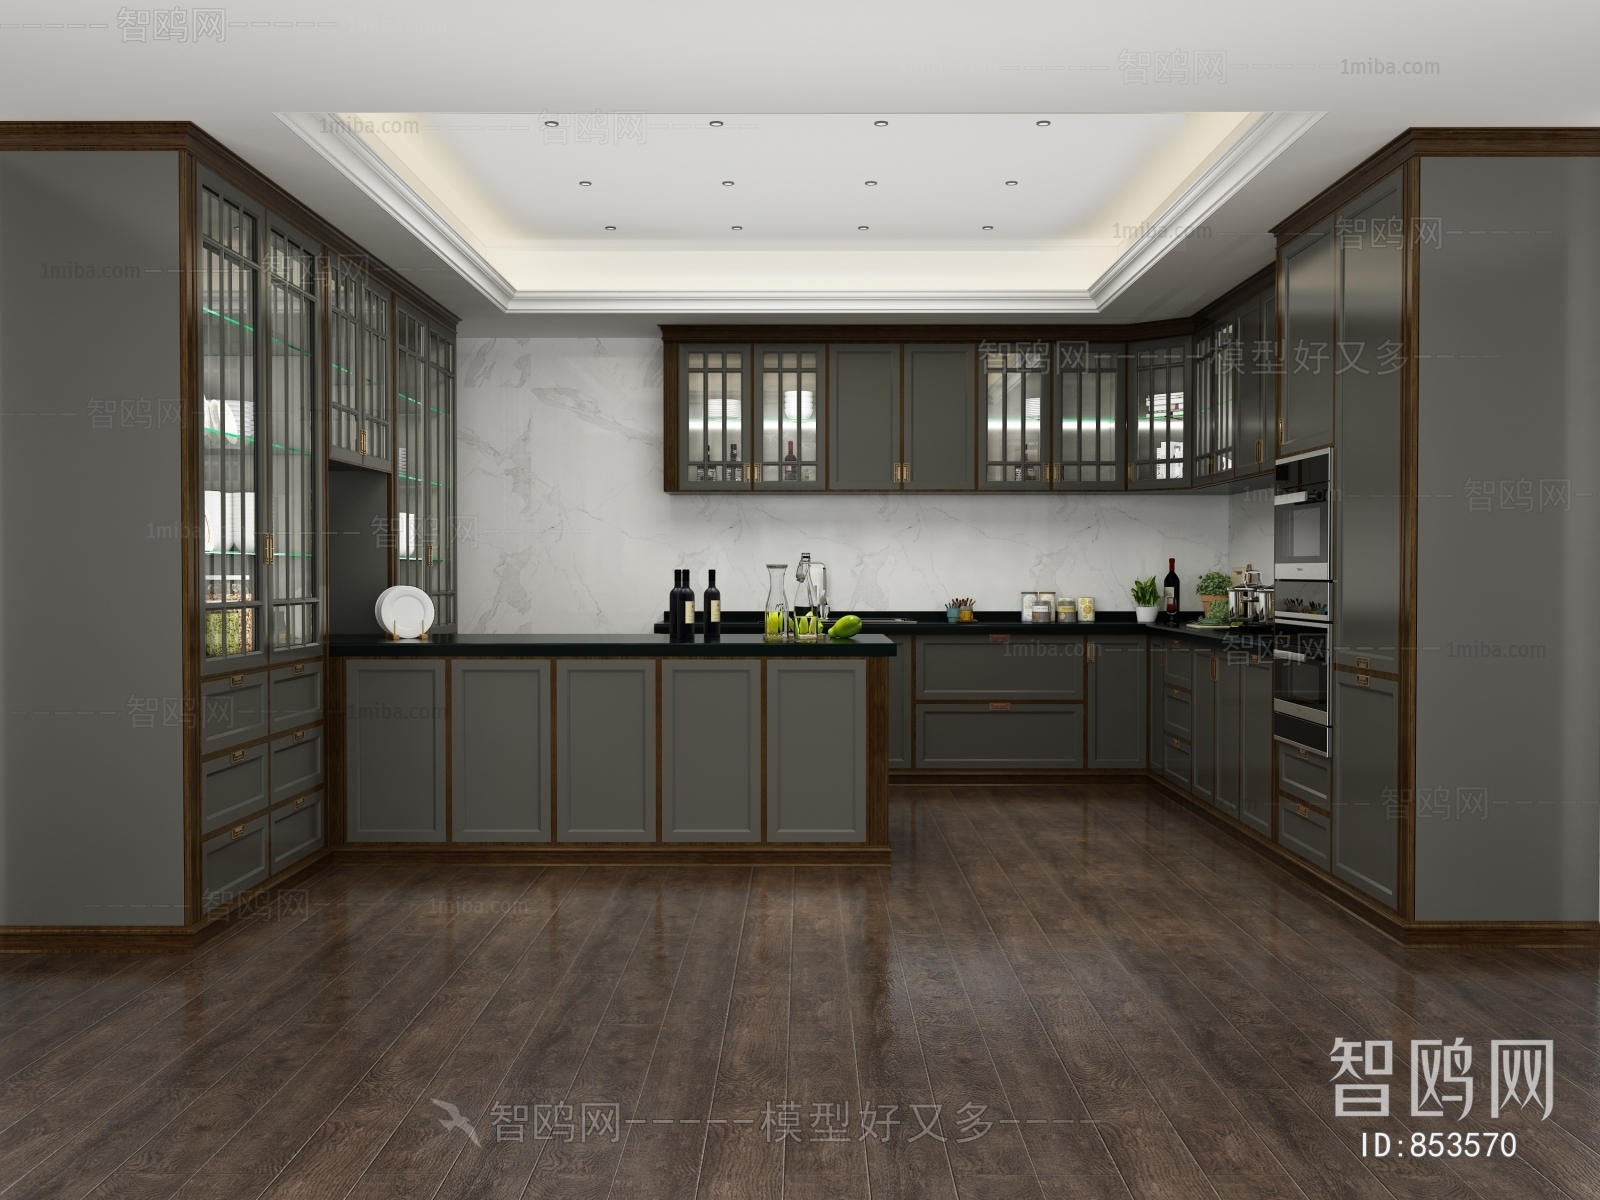 Chinese Style Kitchen Cabinet